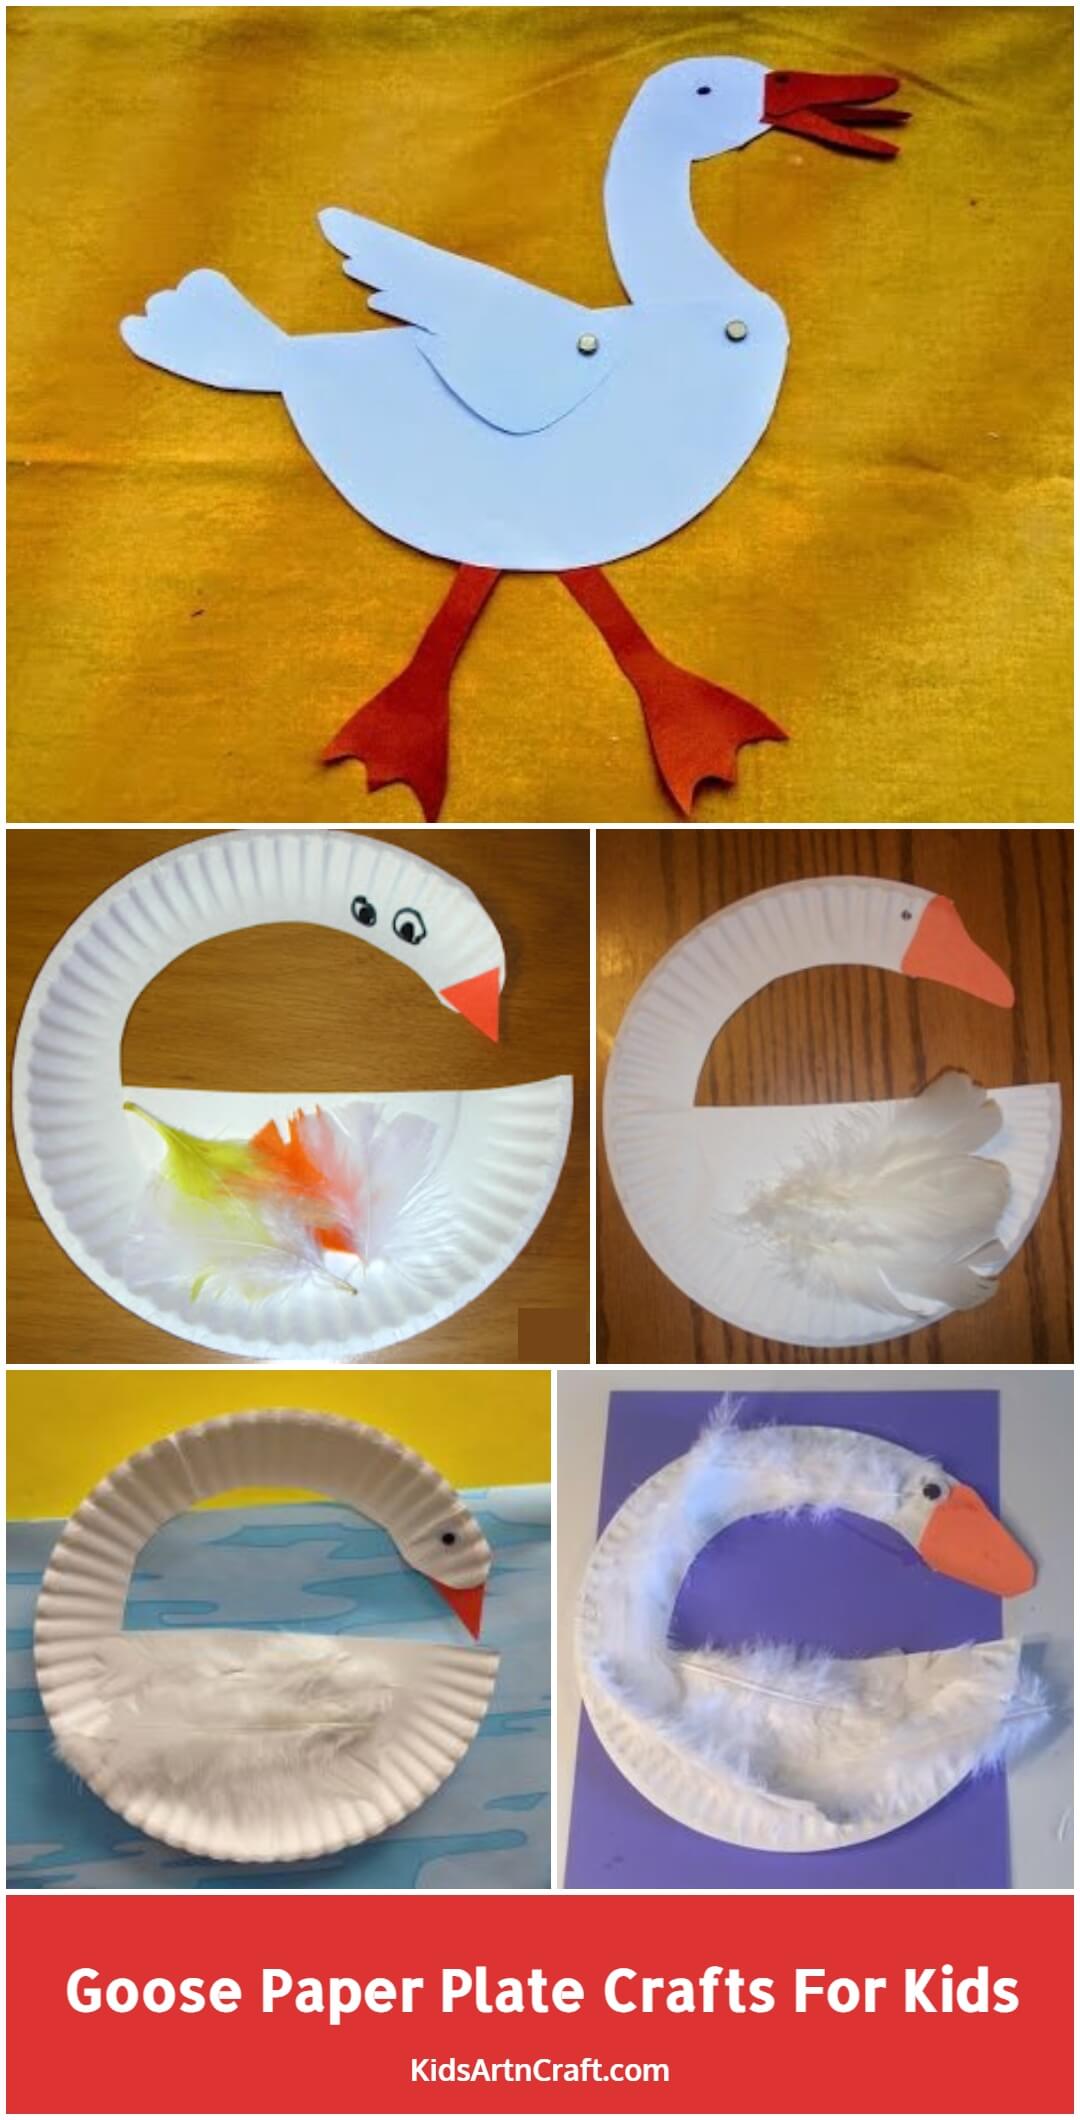 Goose Paper Plate Crafts For Kids